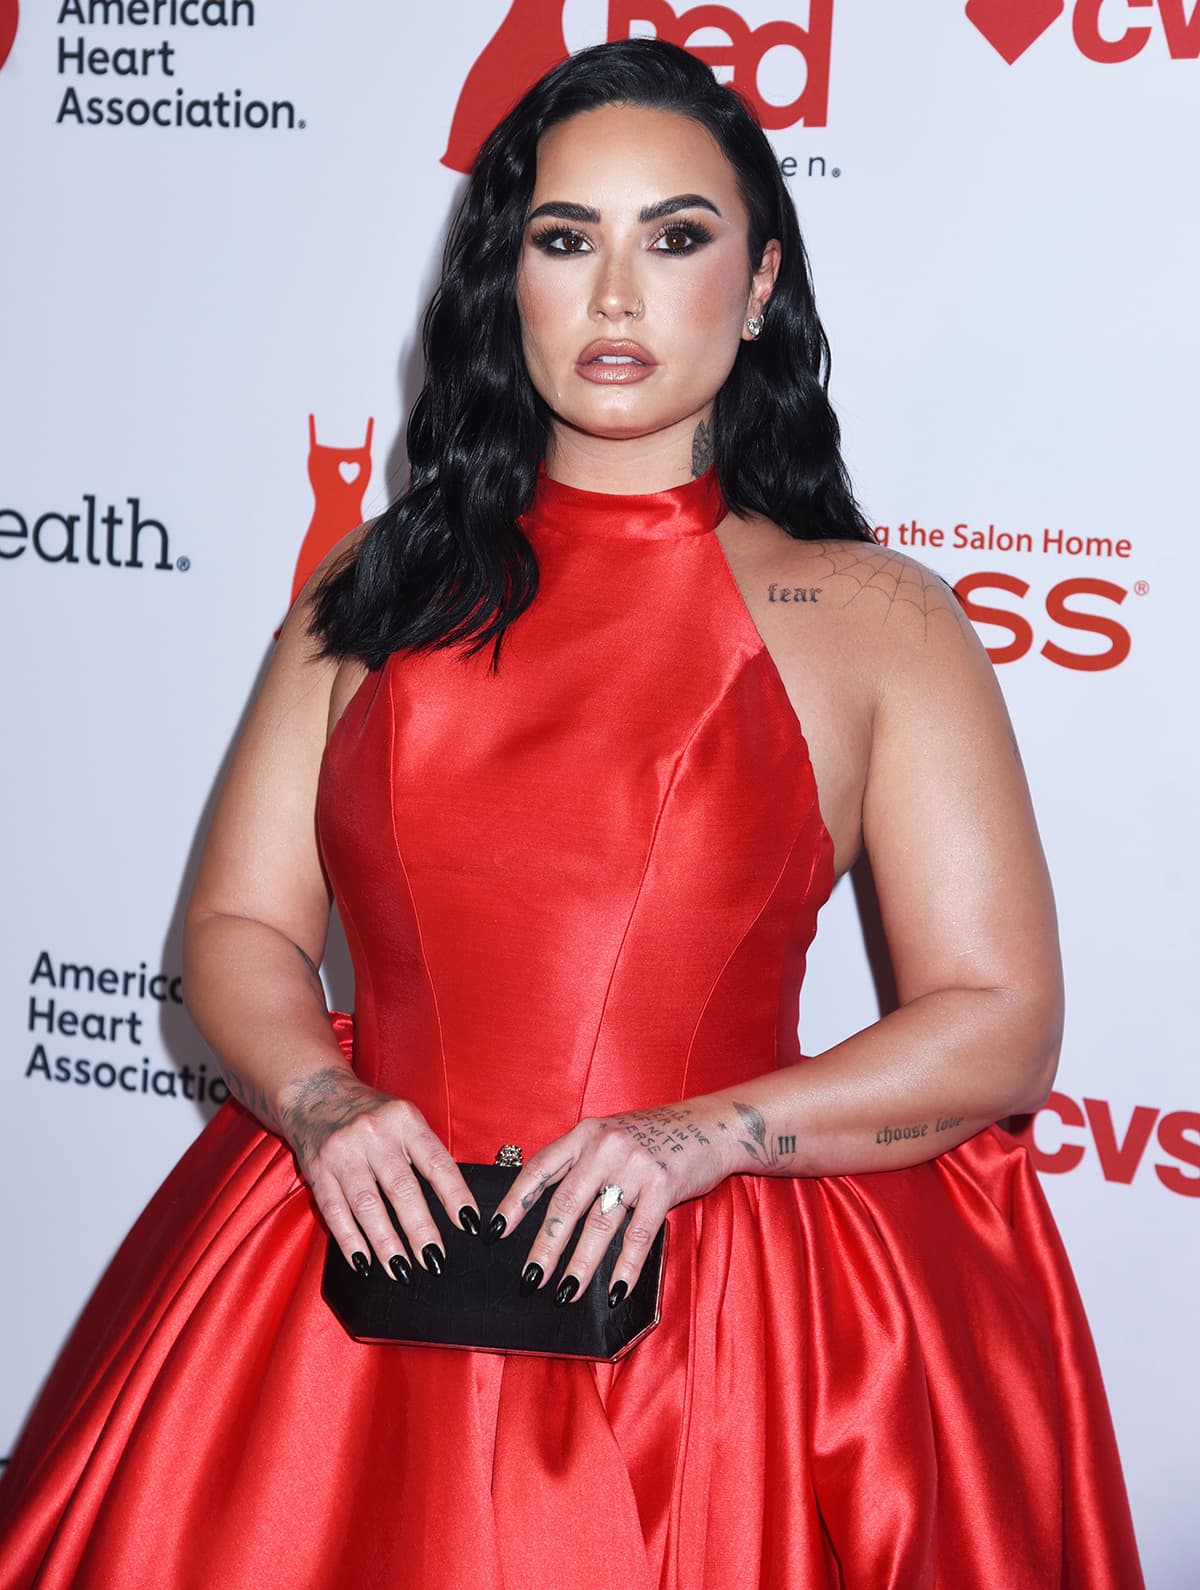 Demi Lovato shows off her arm tattoos and pear-shaped diamond engagement ring while holding a black Tyler Perry clutch